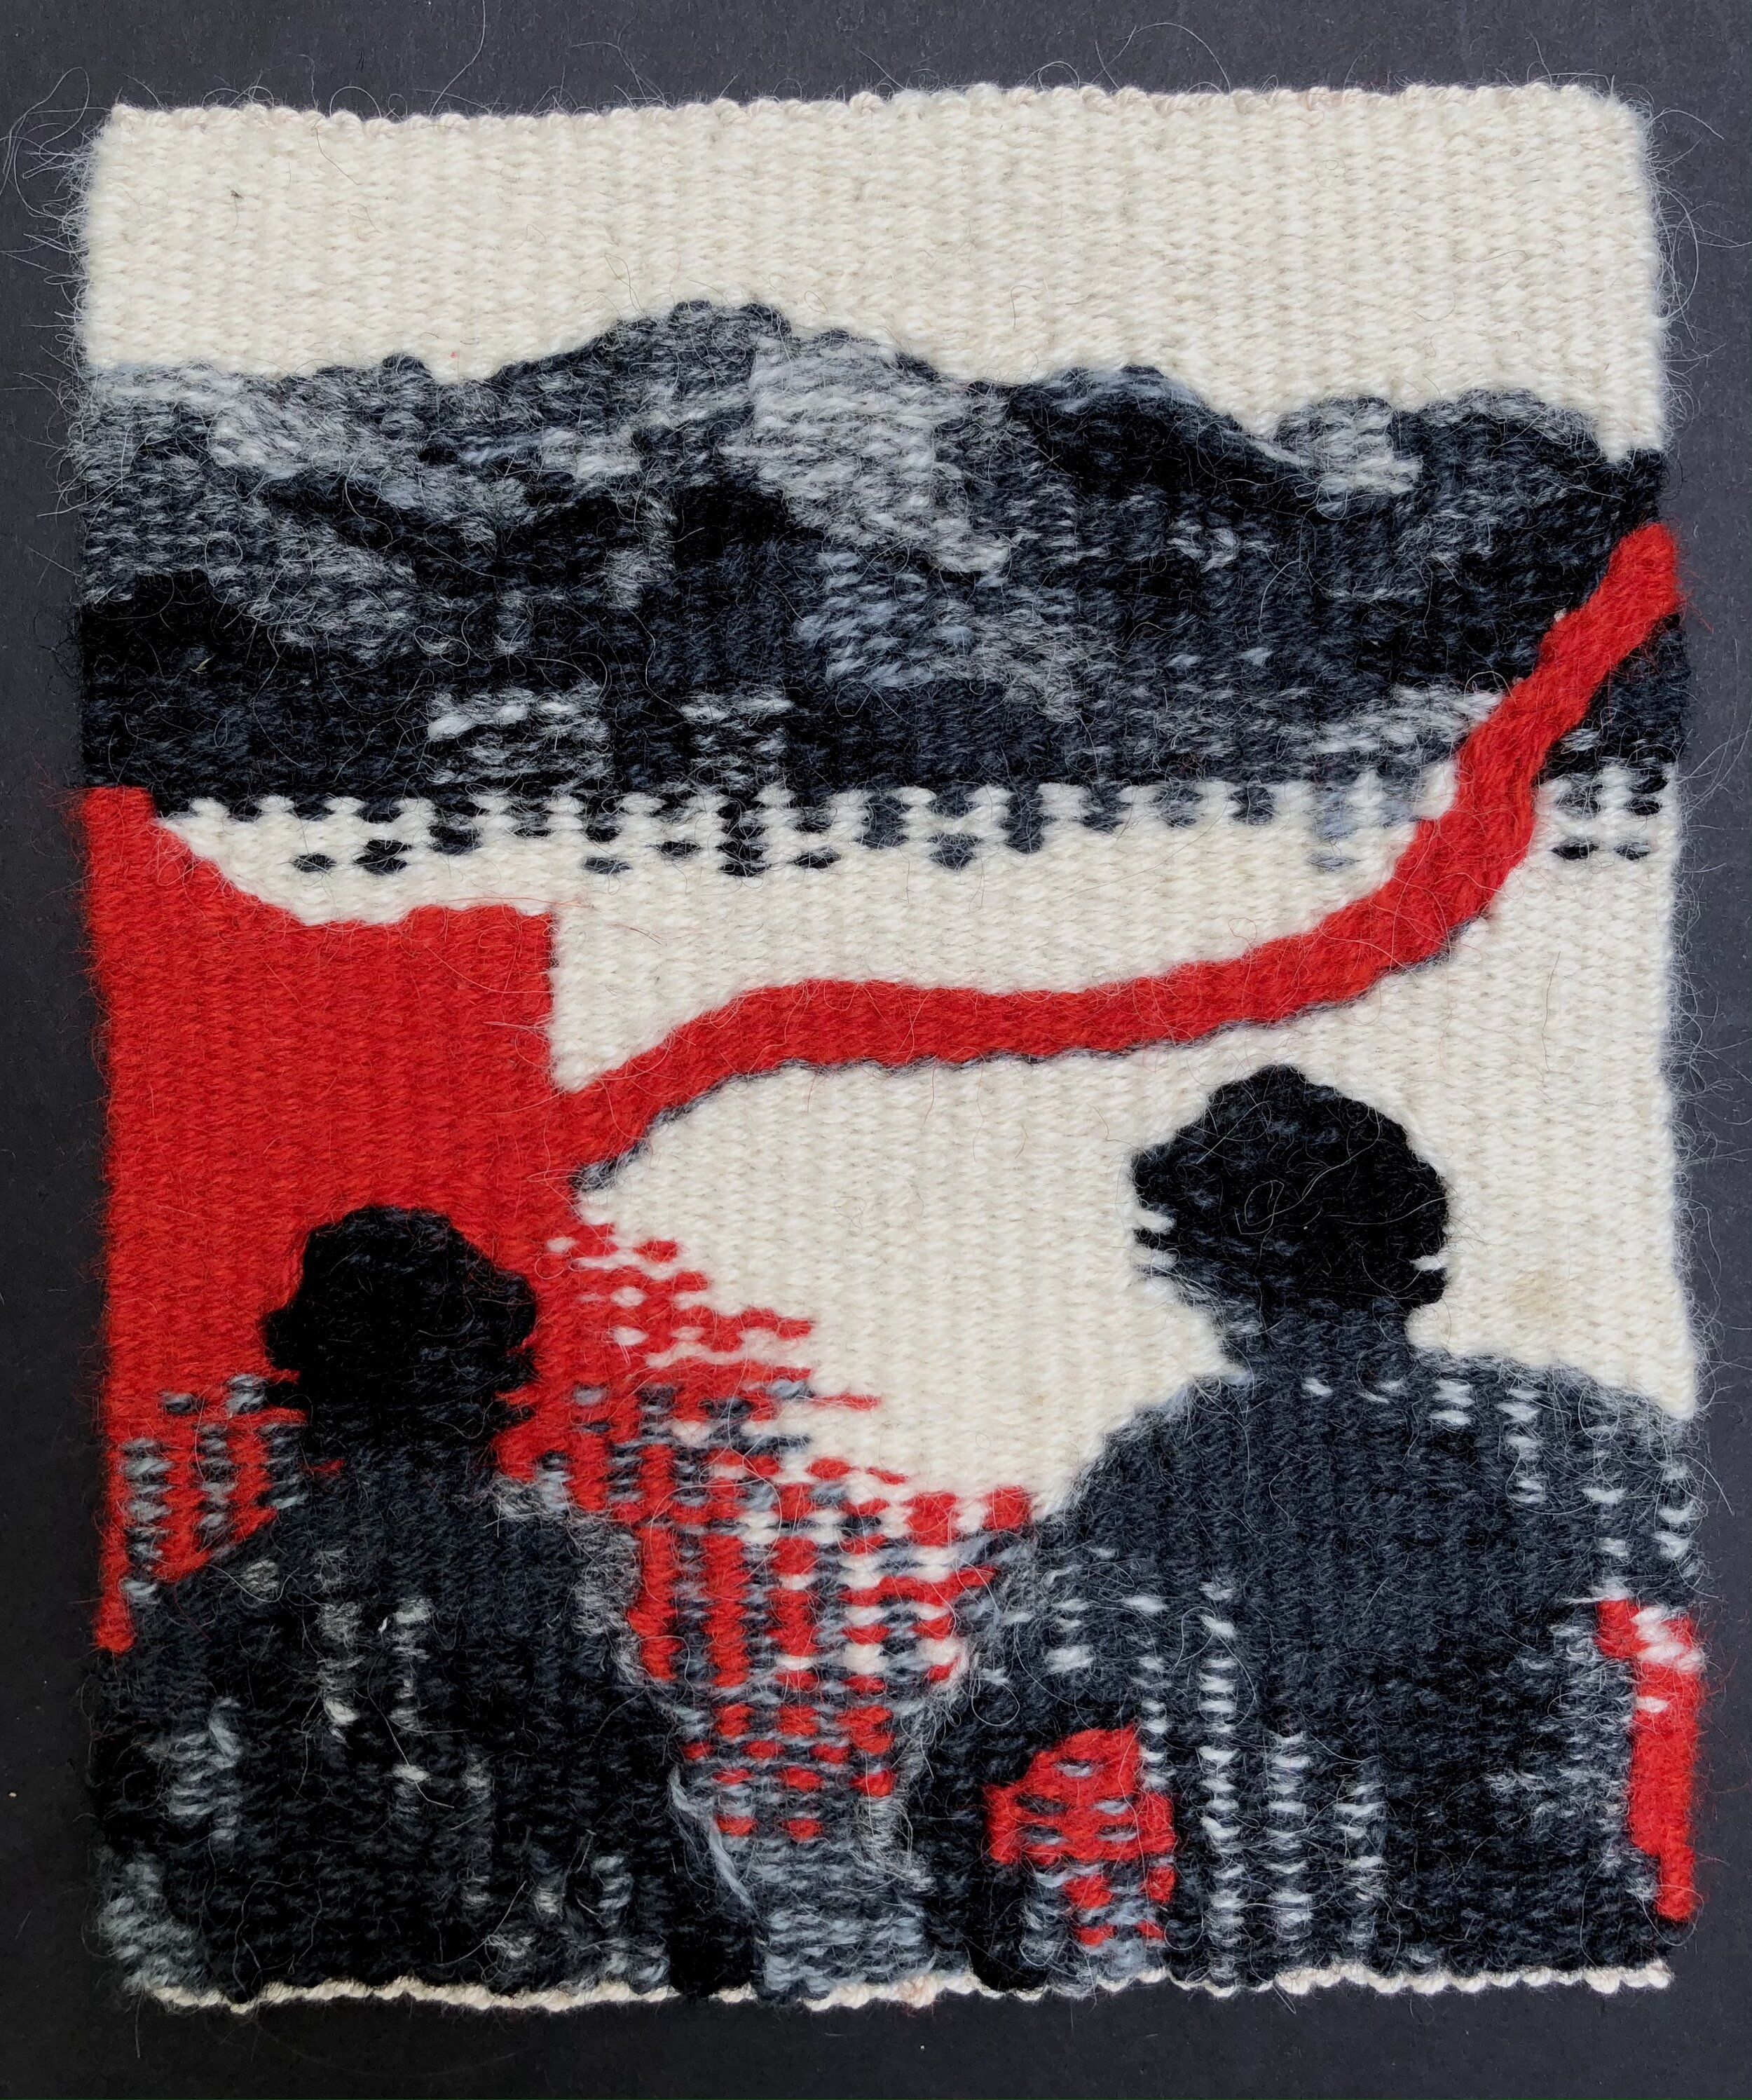   Lake of Fire , 2021. Cotton warp and wool weft. 7.5” x 9”. Finalist for the Australian Tapestry Workshop’s 2021 Irene Davies Emerging Artist Award. 